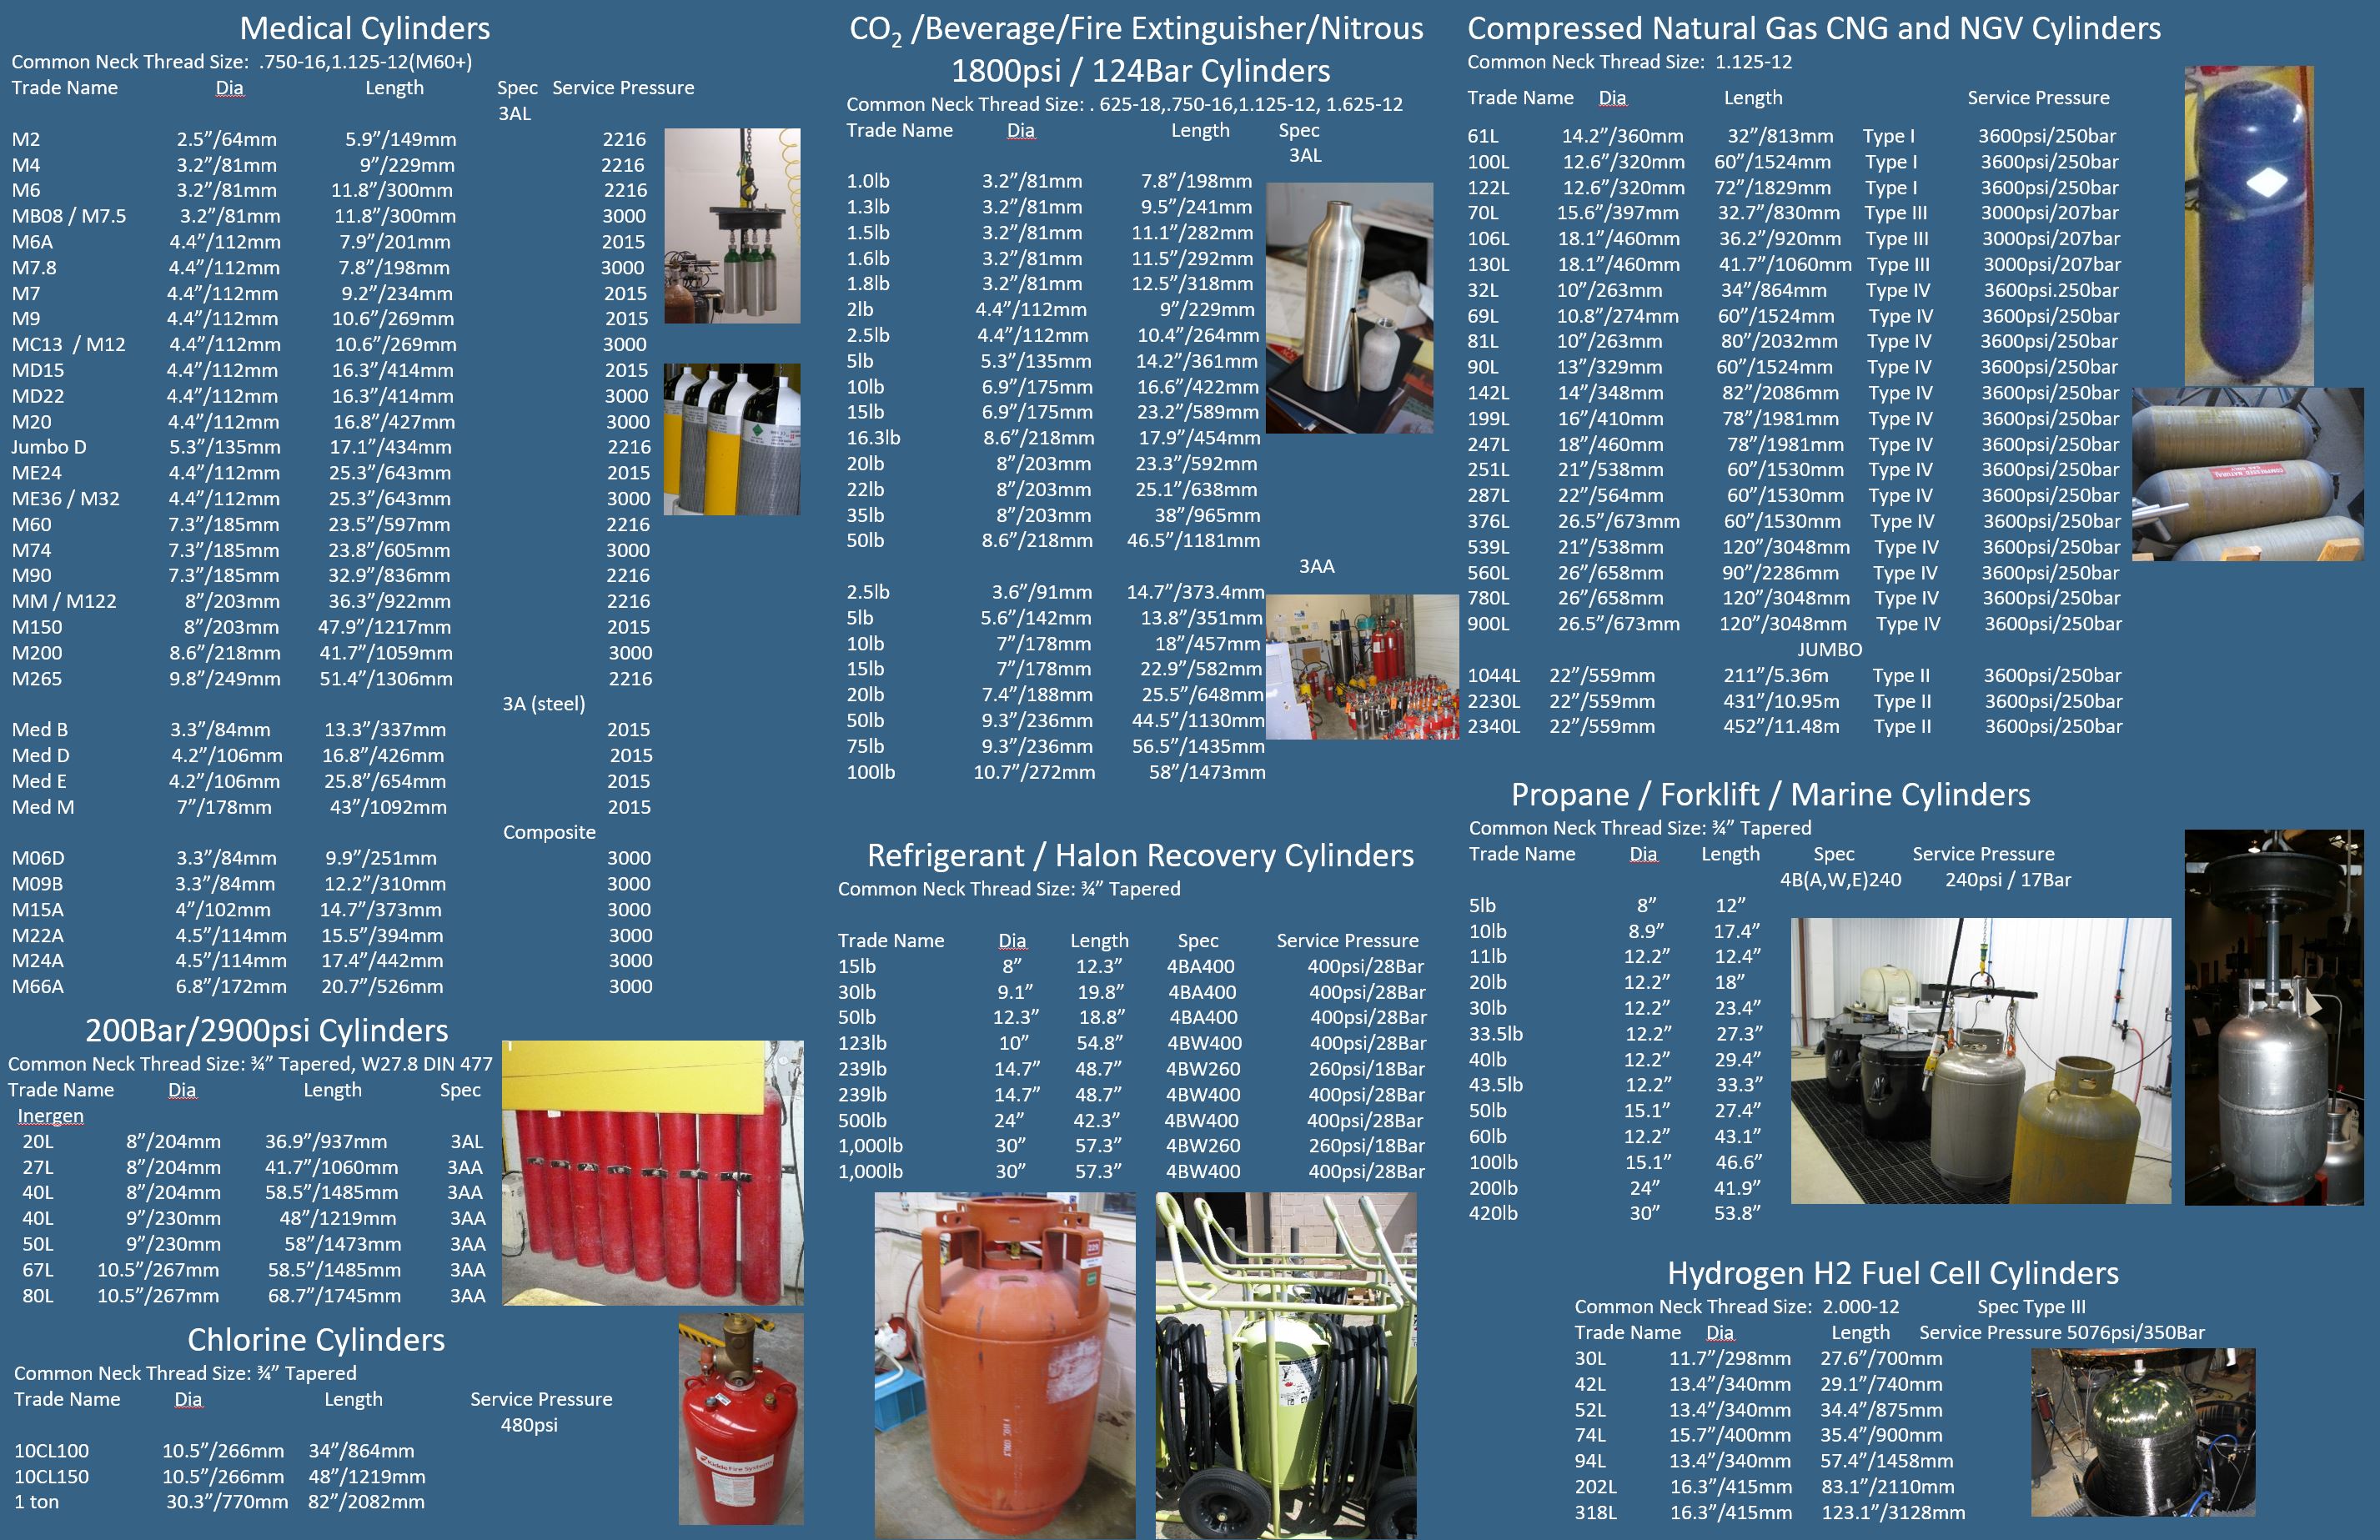 Hydrostatic Test Systems for all Cylinder Types, Medical, CO2, Propane, Hydrogen, CNG, Halon, Chlorine